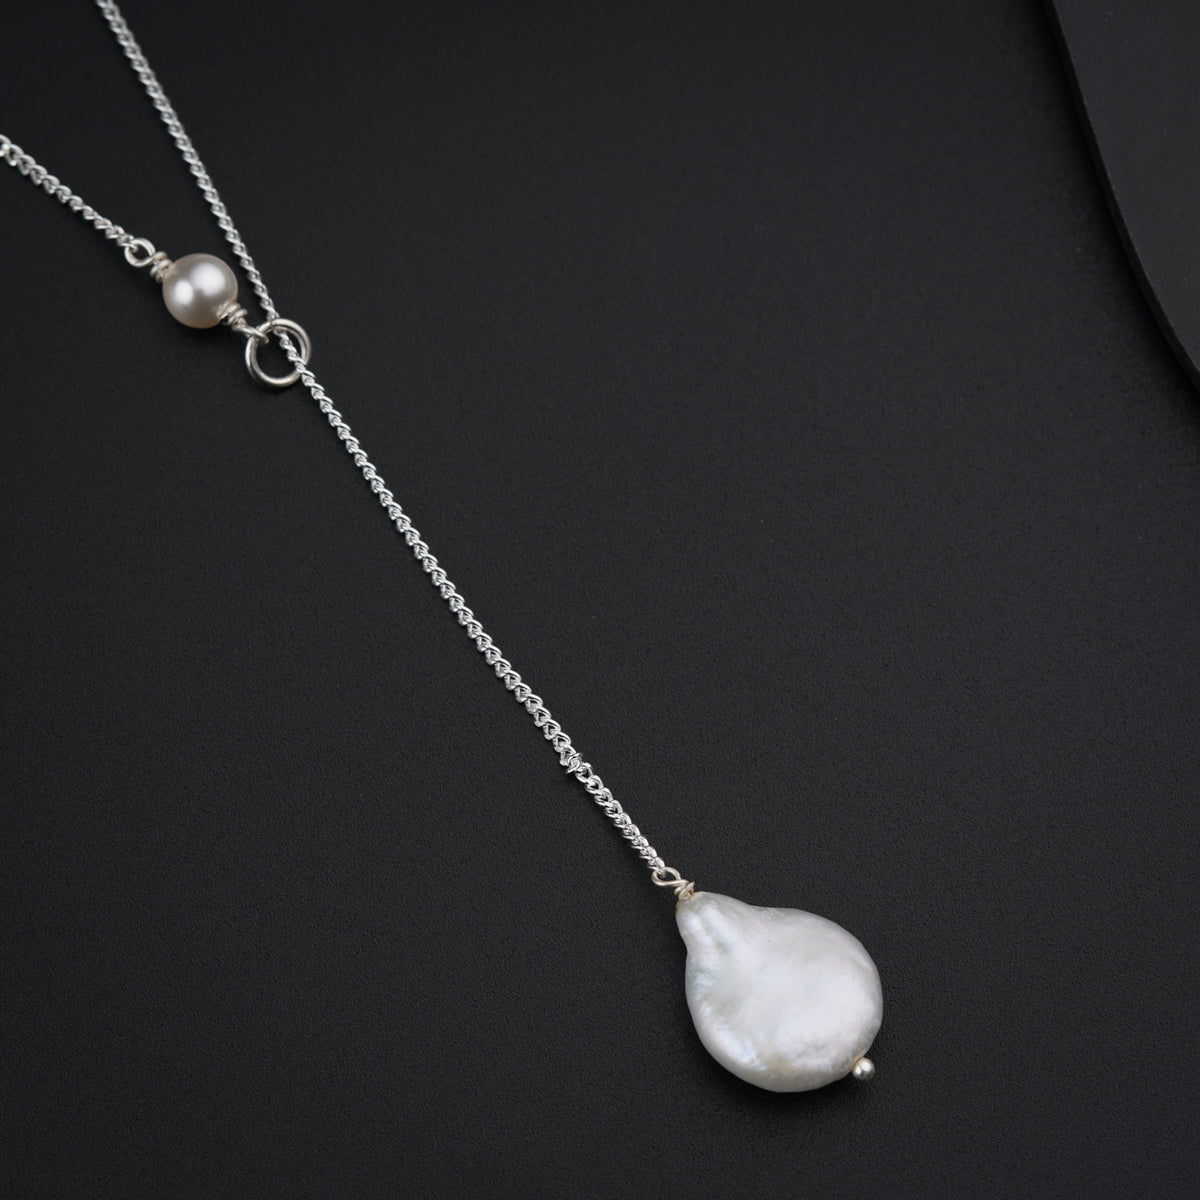 a necklace with a white pearl hanging from it